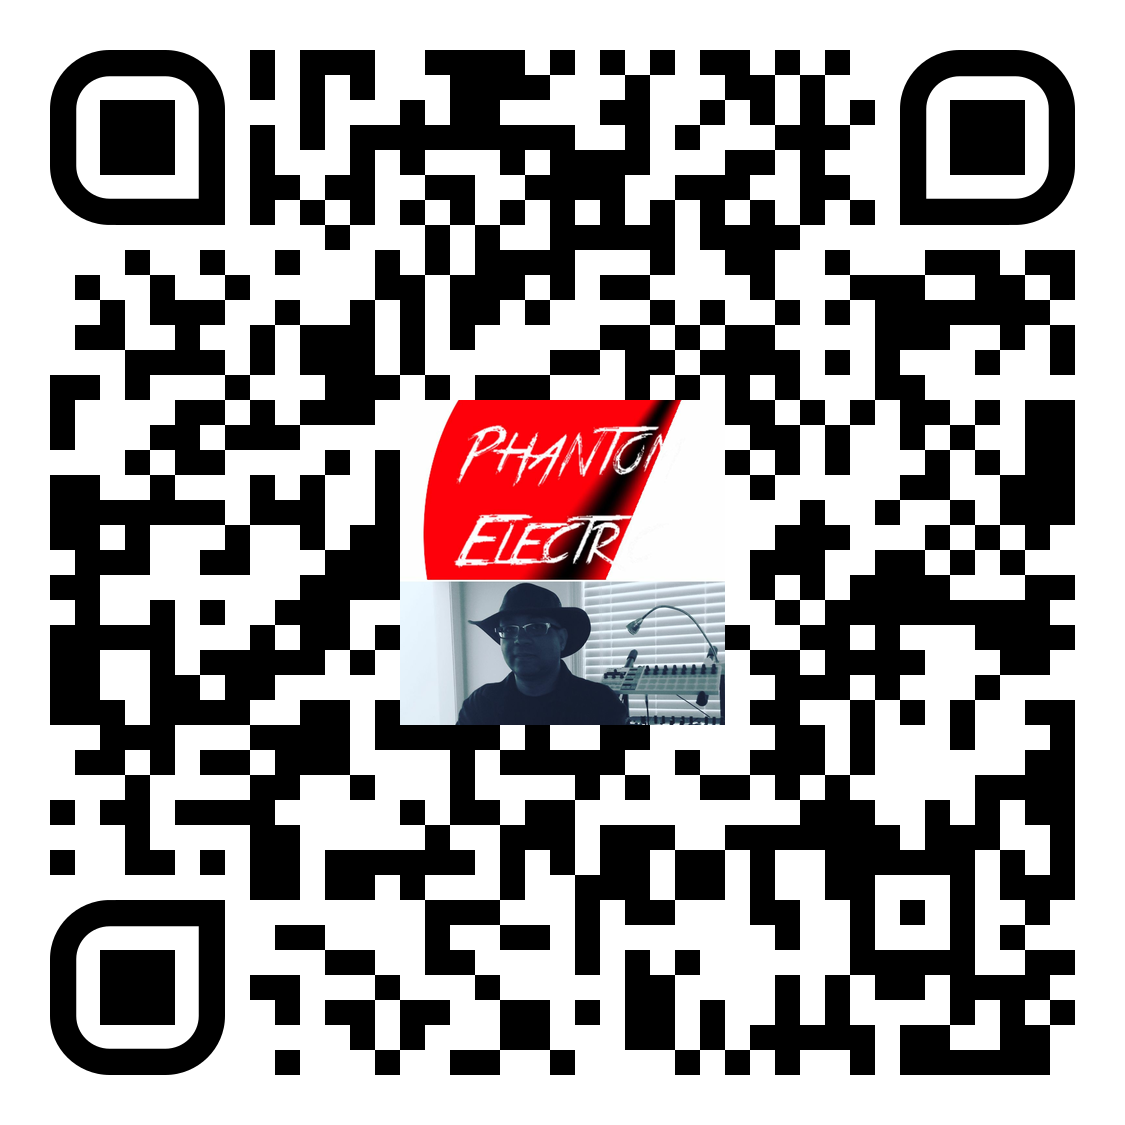 doublejack partner for music and interviews - phnatomelectricghost - scan the code for signup